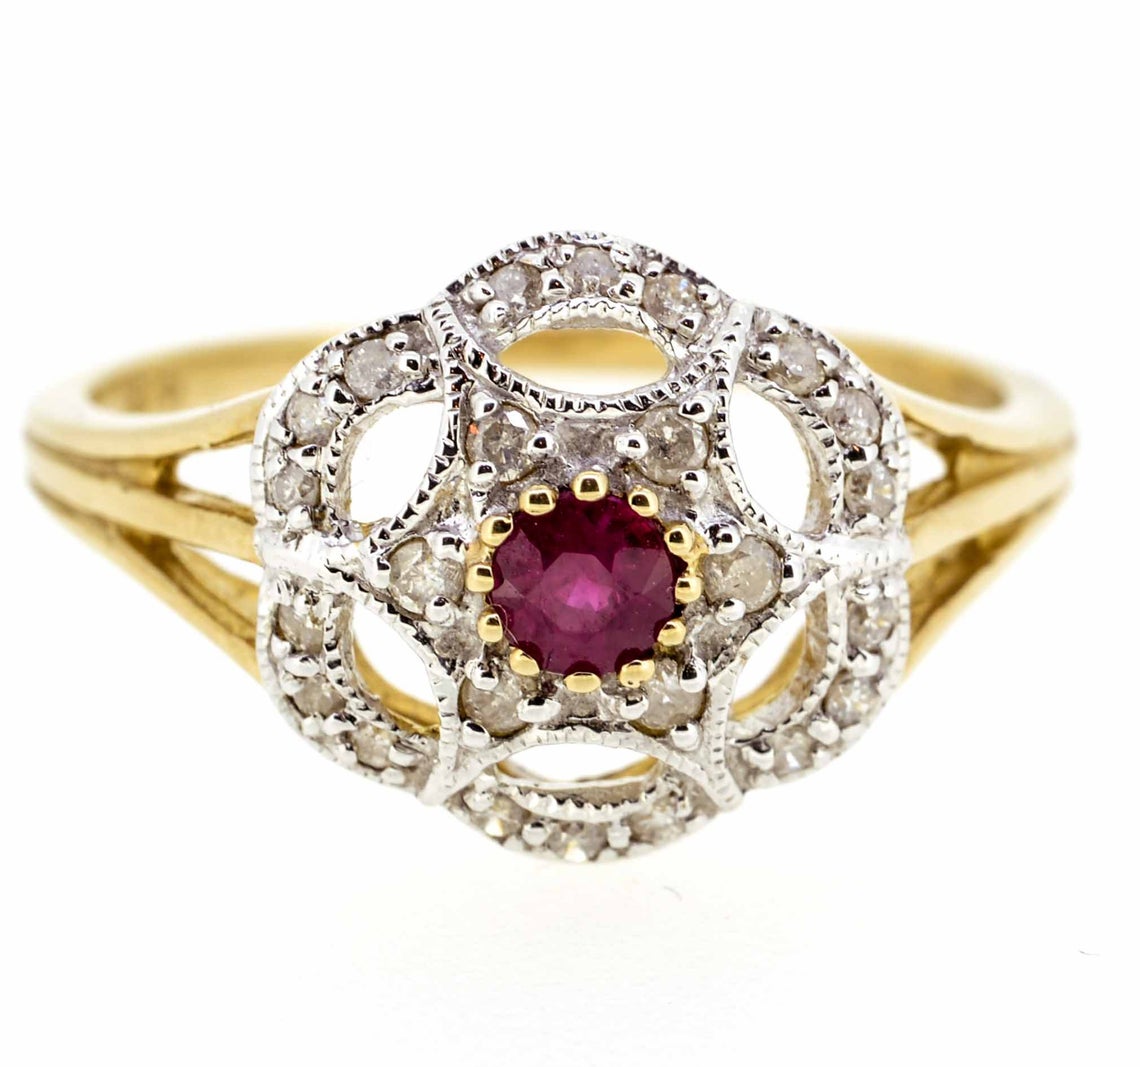 9ct Yellow Gold Antique Style Ruby and Diamond Cluster Ring